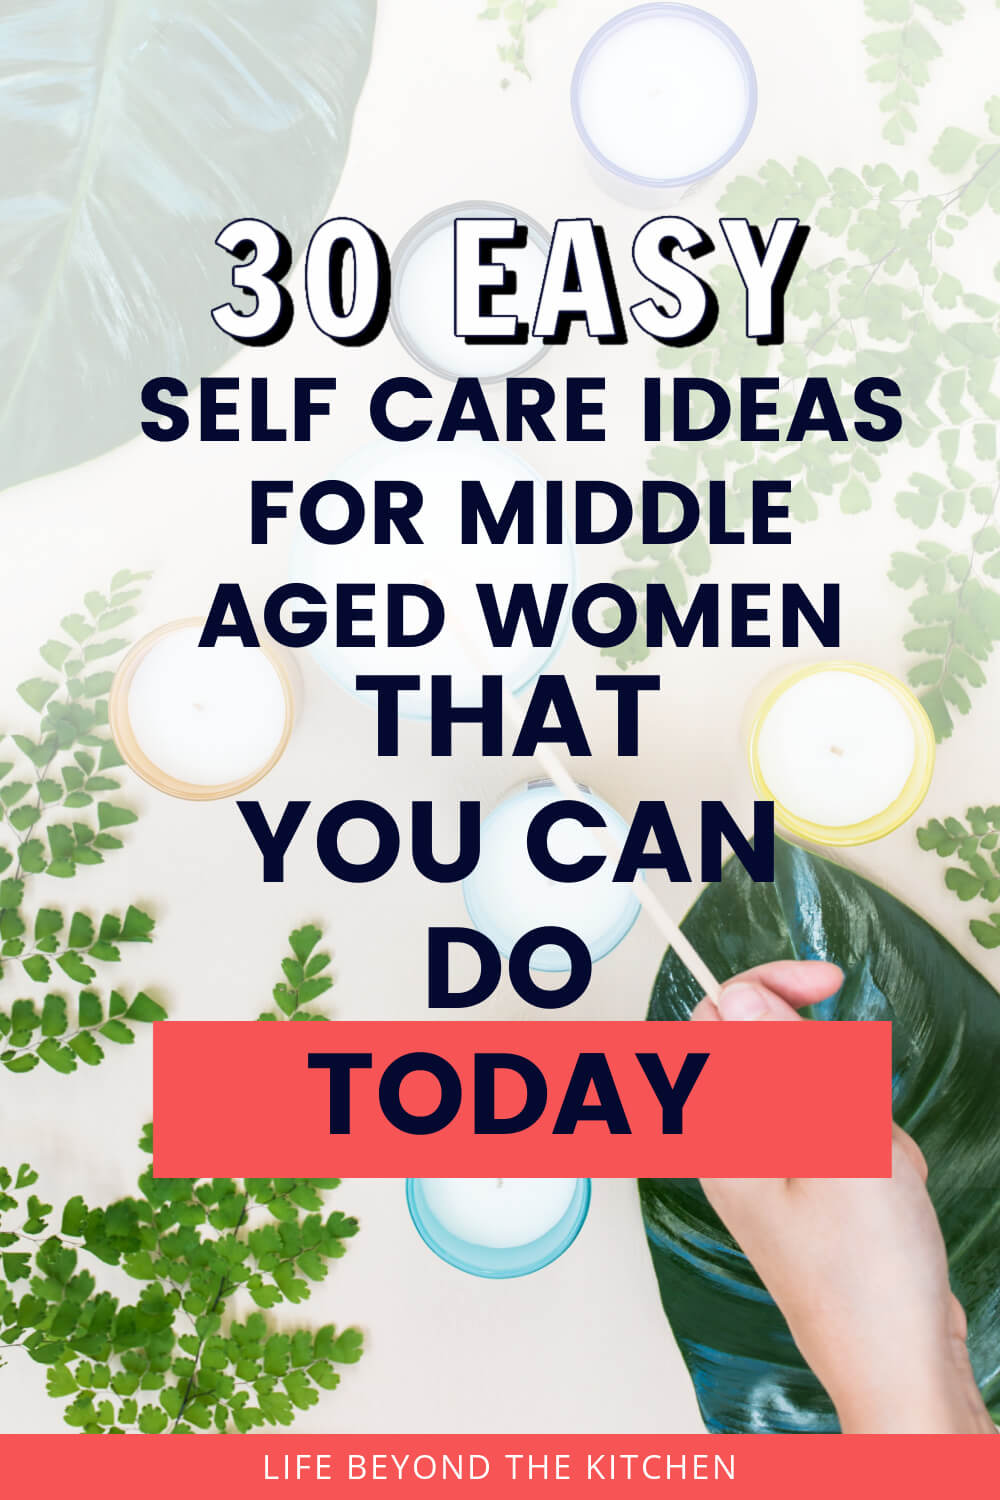 Self Care Ideas for Middle Aged Women That You Can Do Today